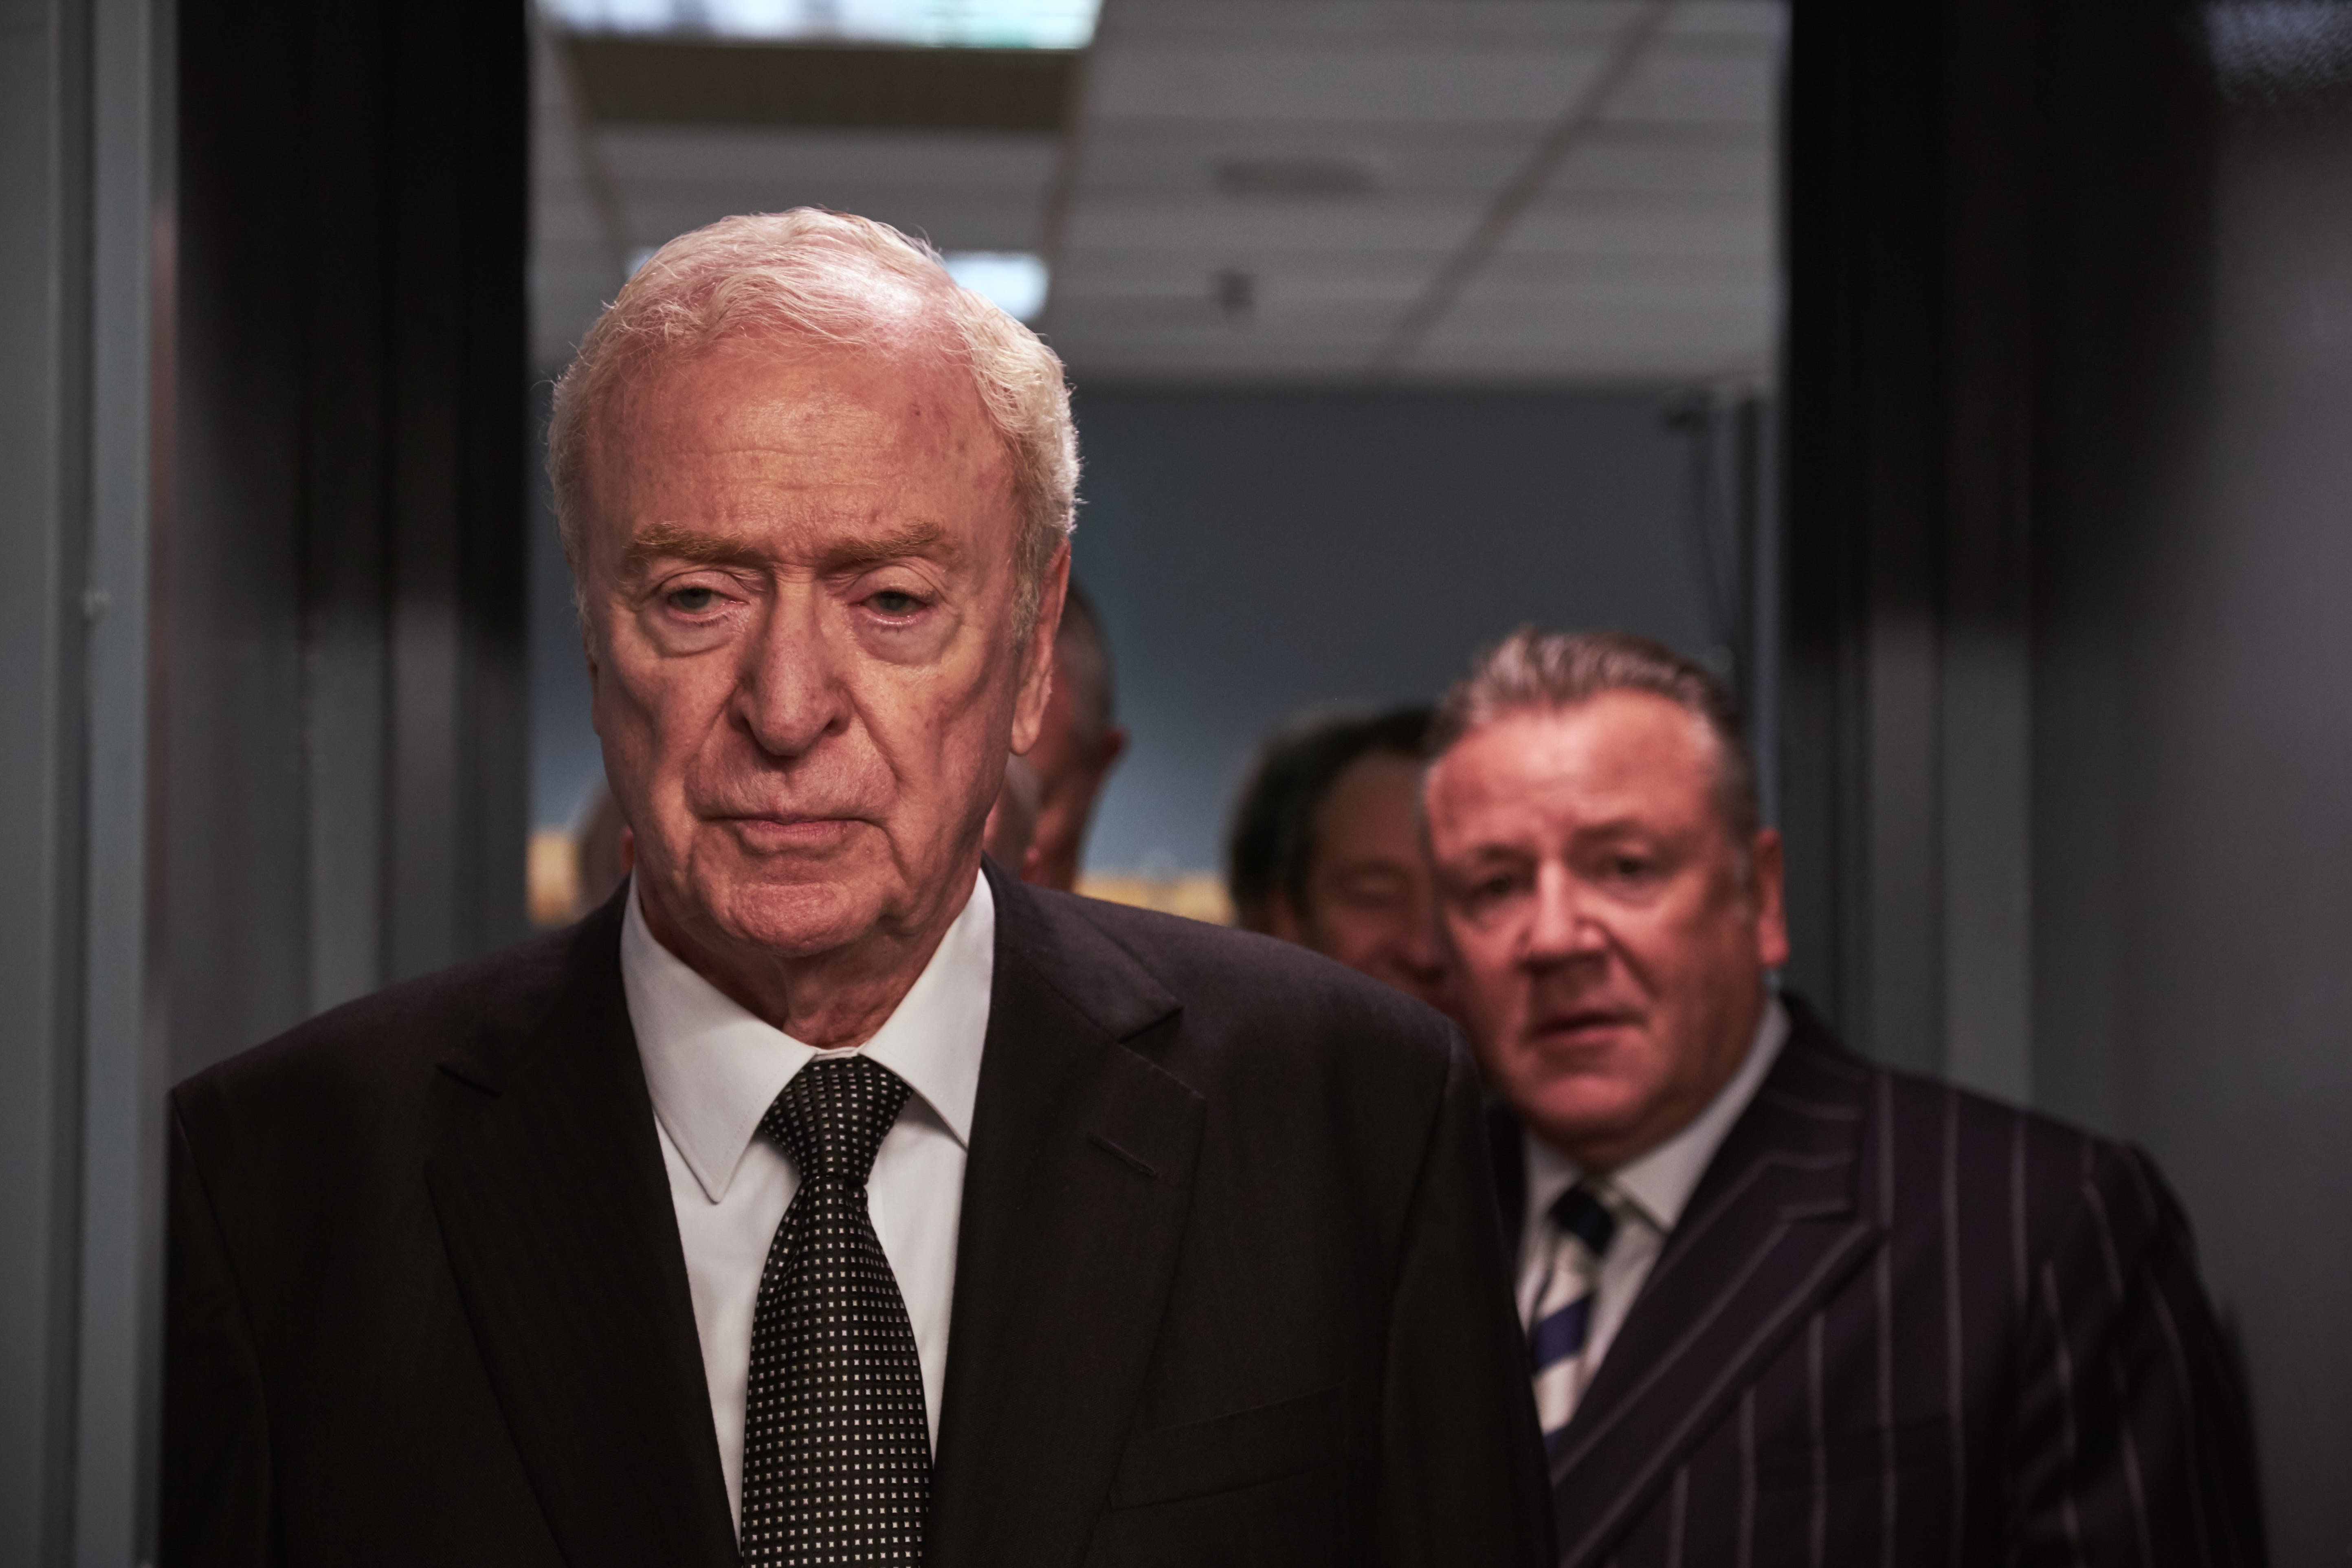 Michael Caine in King of Thieves.